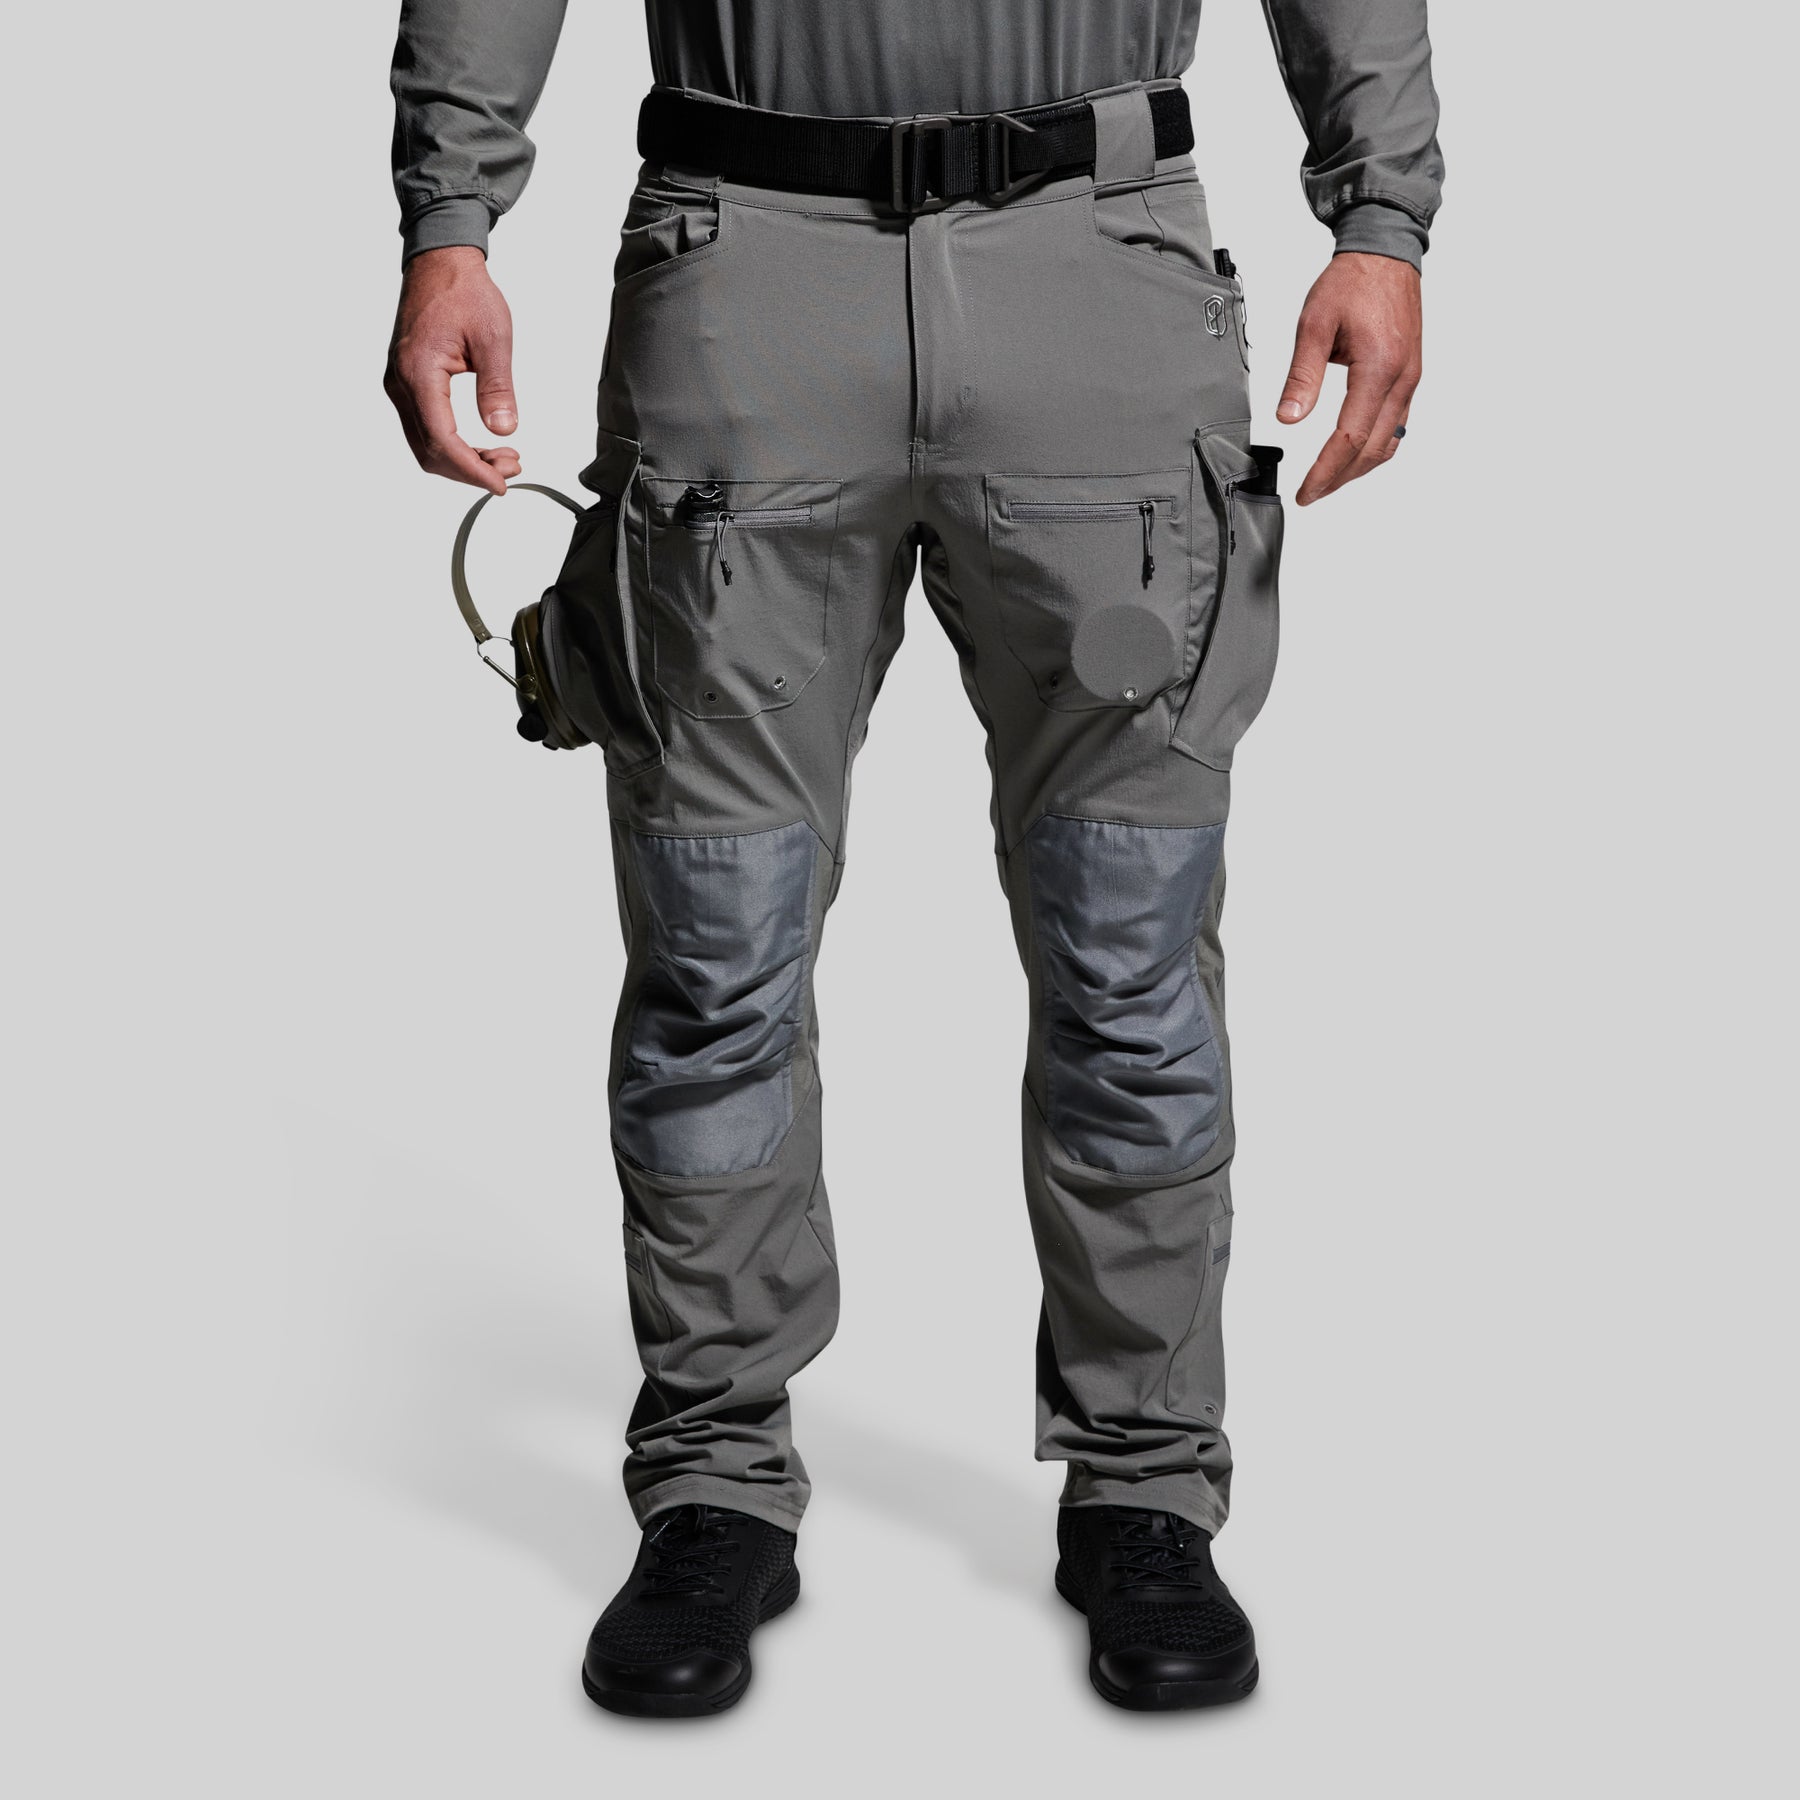 Tapered Elastic Cargo Pants - Vogue Rogue